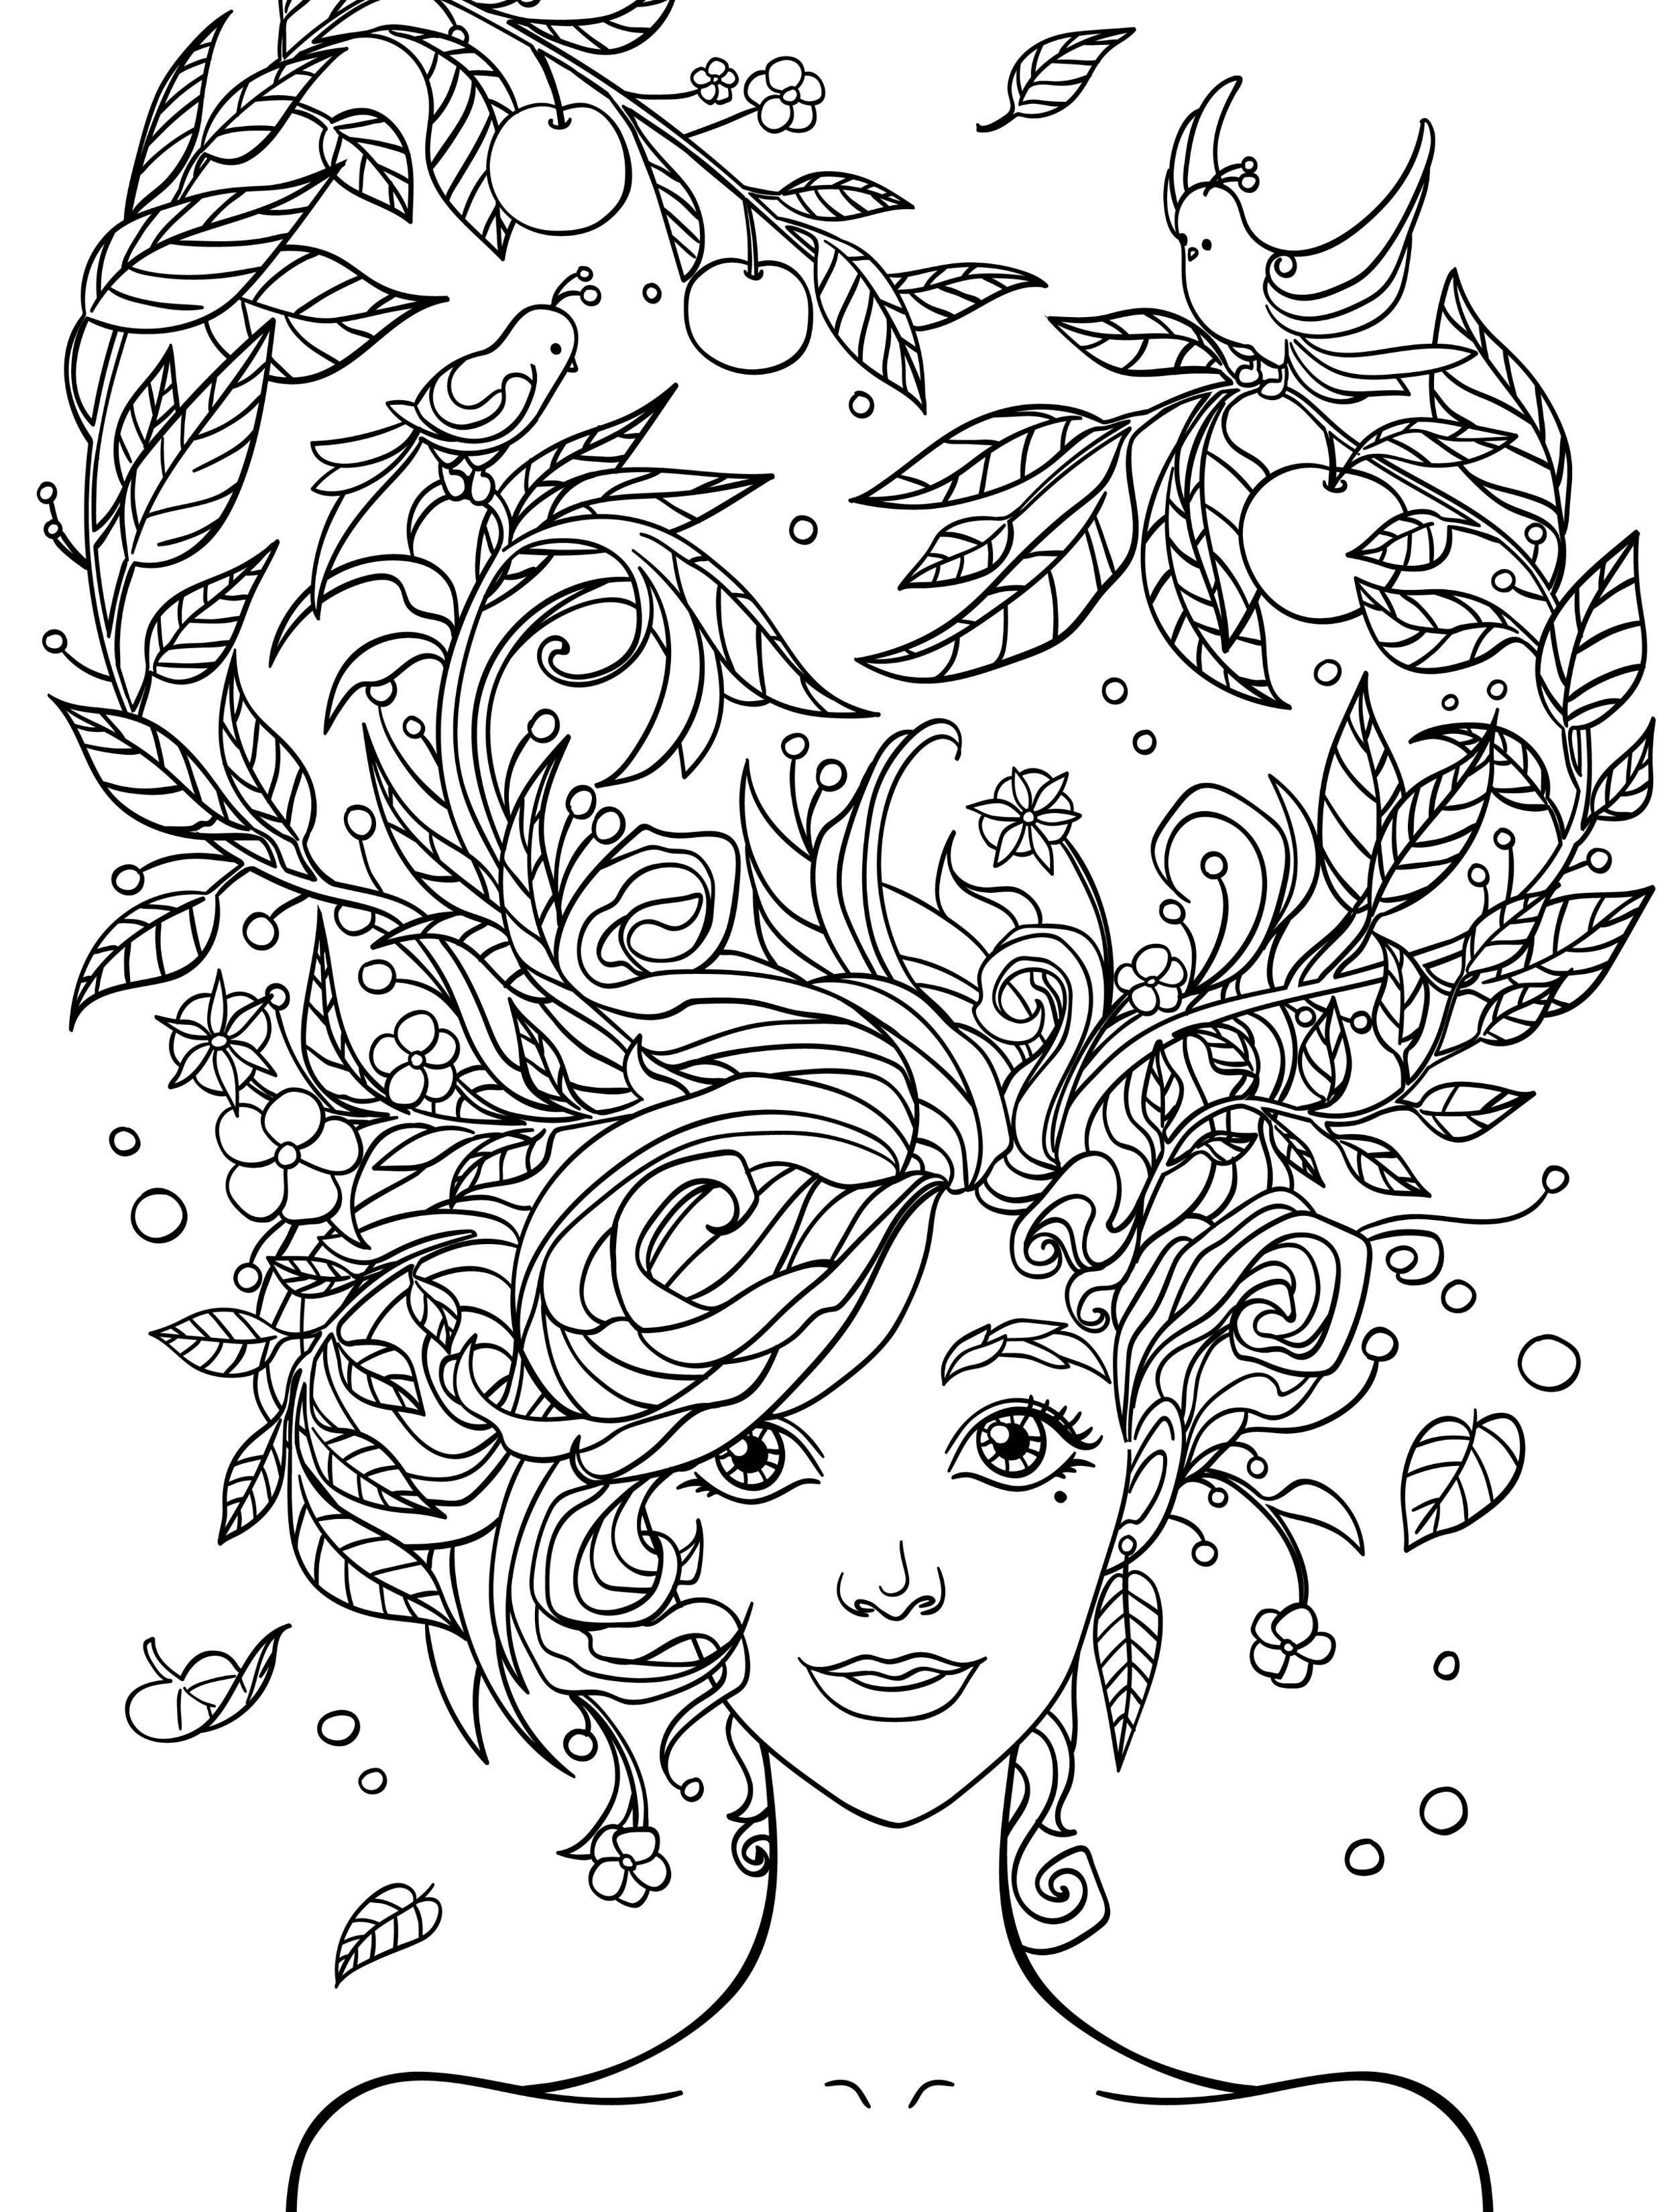 Christmas Girl Coloring Pages For Adults
 10 Crazy Hair Adult Coloring Pages Page 5 of 12 Nerdy